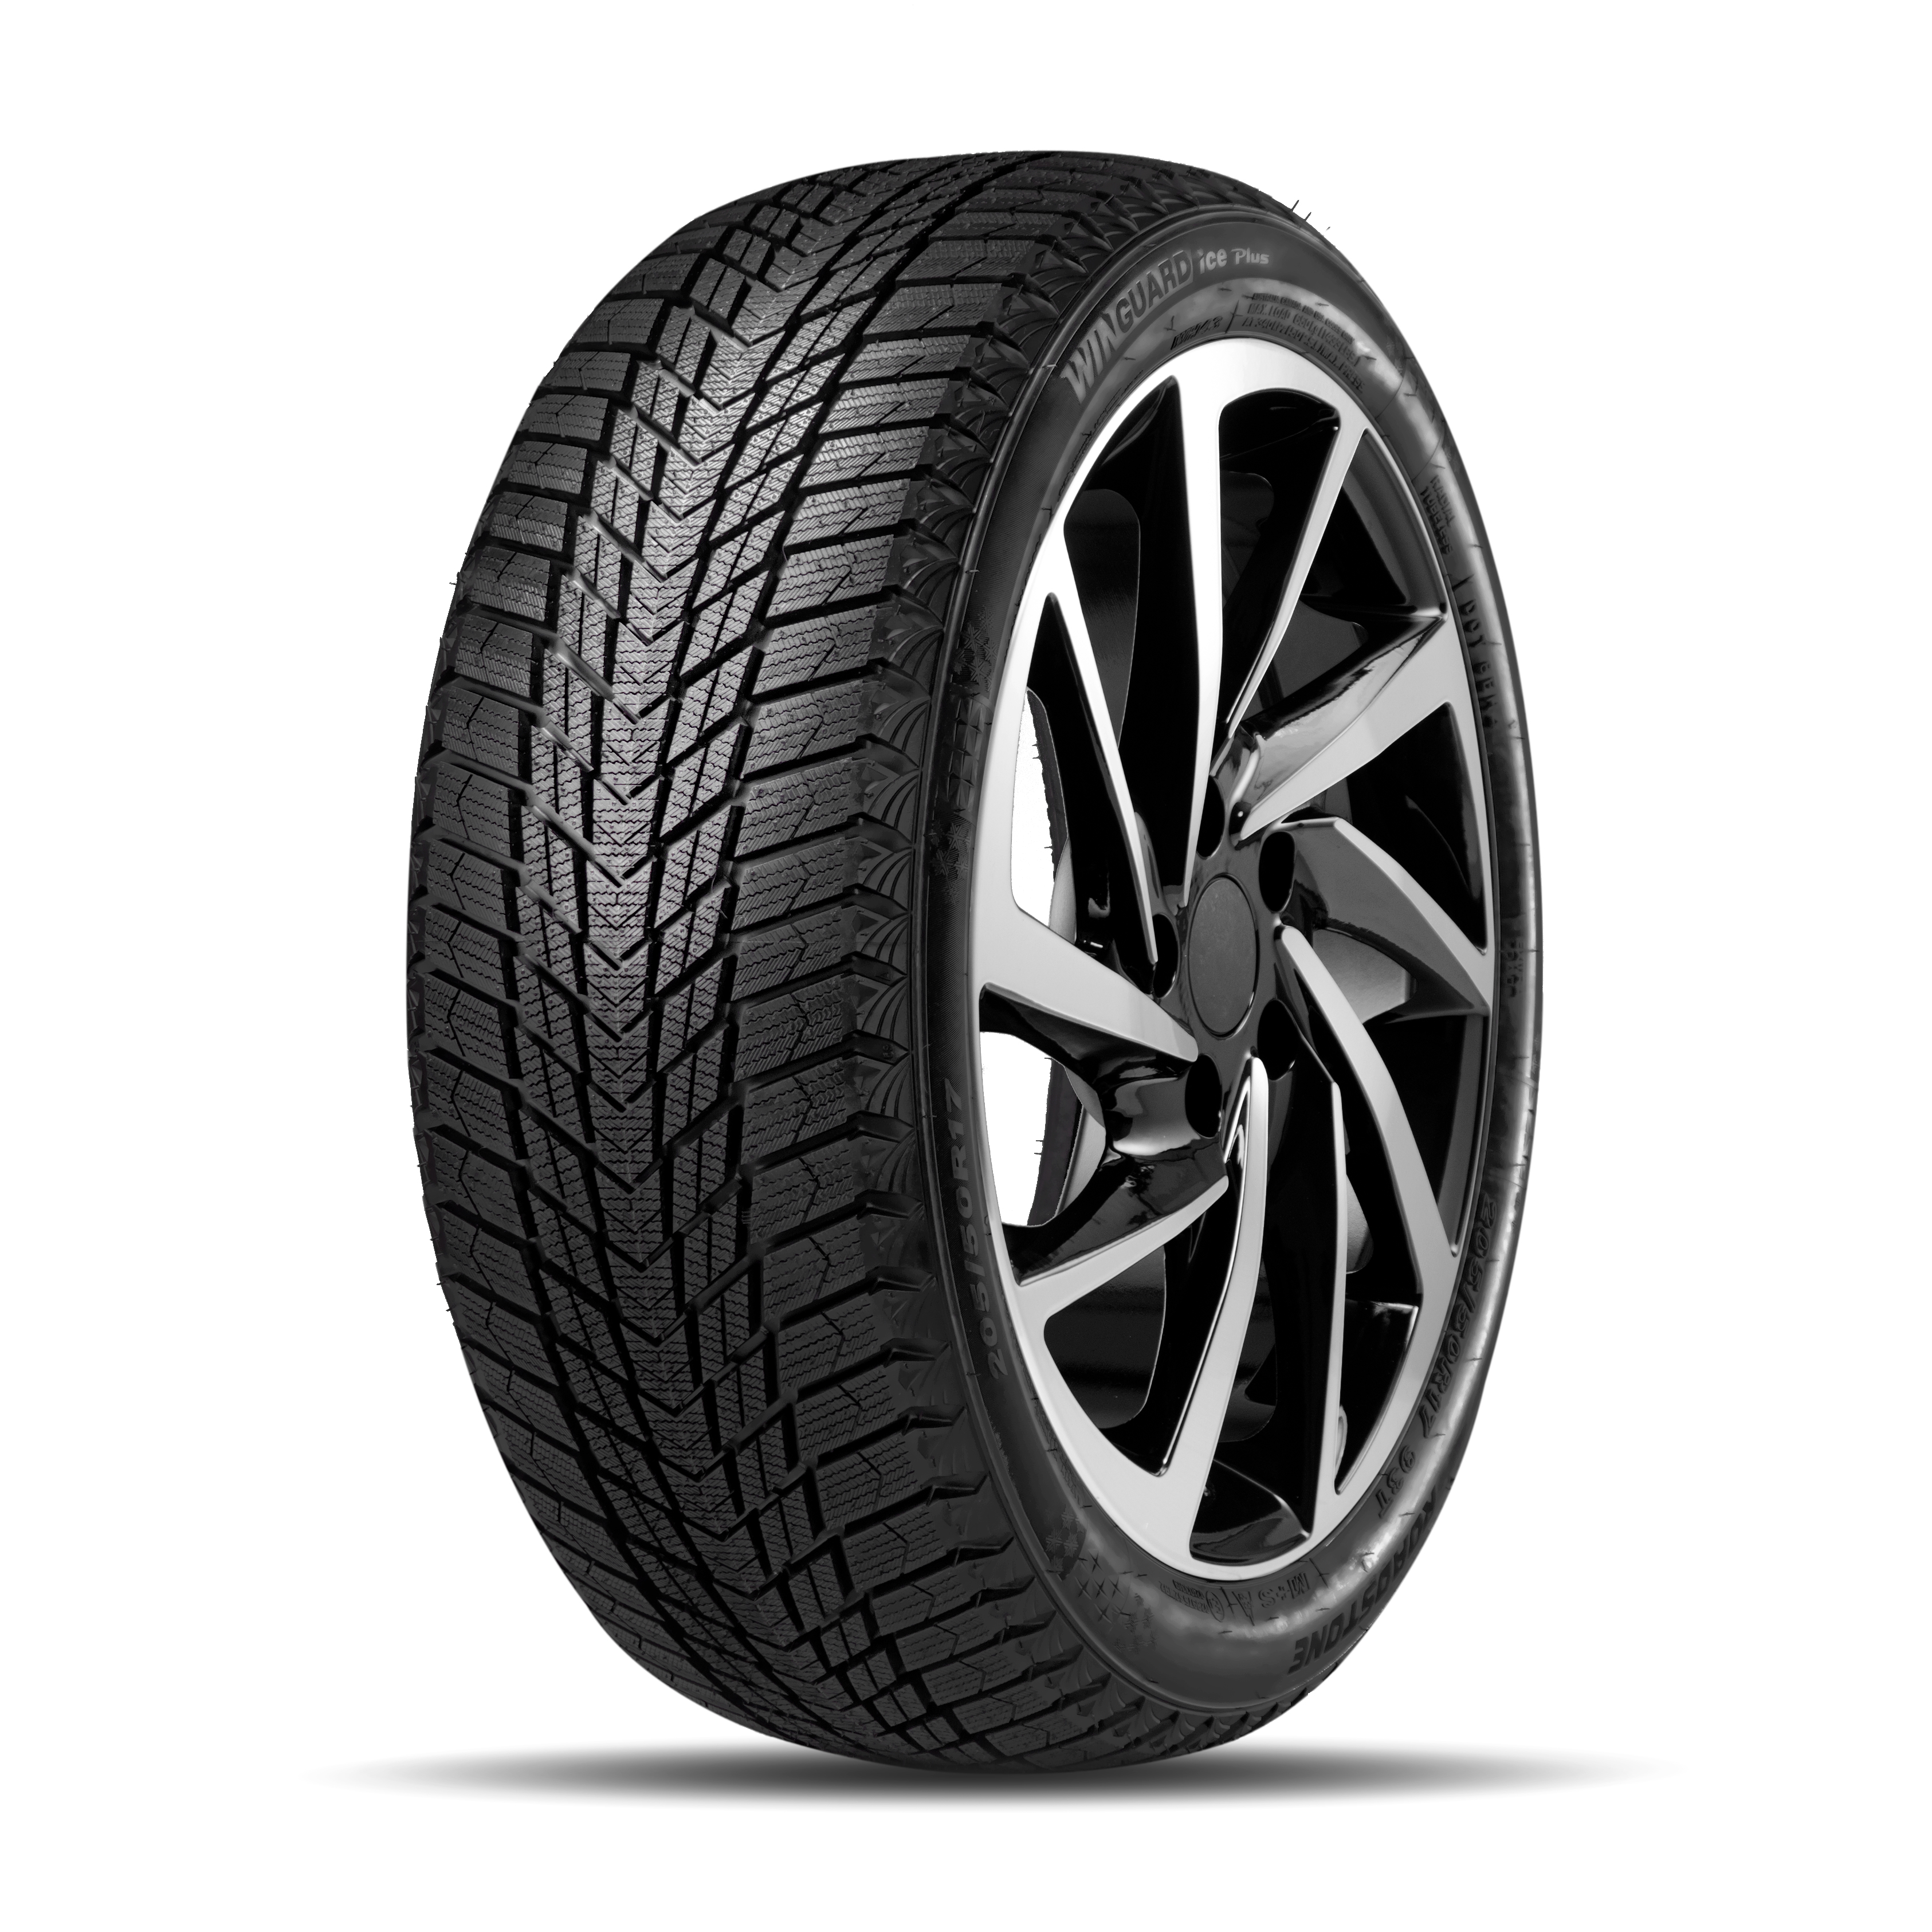 Winguard Ice Plus 205/50 R17 93T icecontact xtrm 205 50 r17 93t